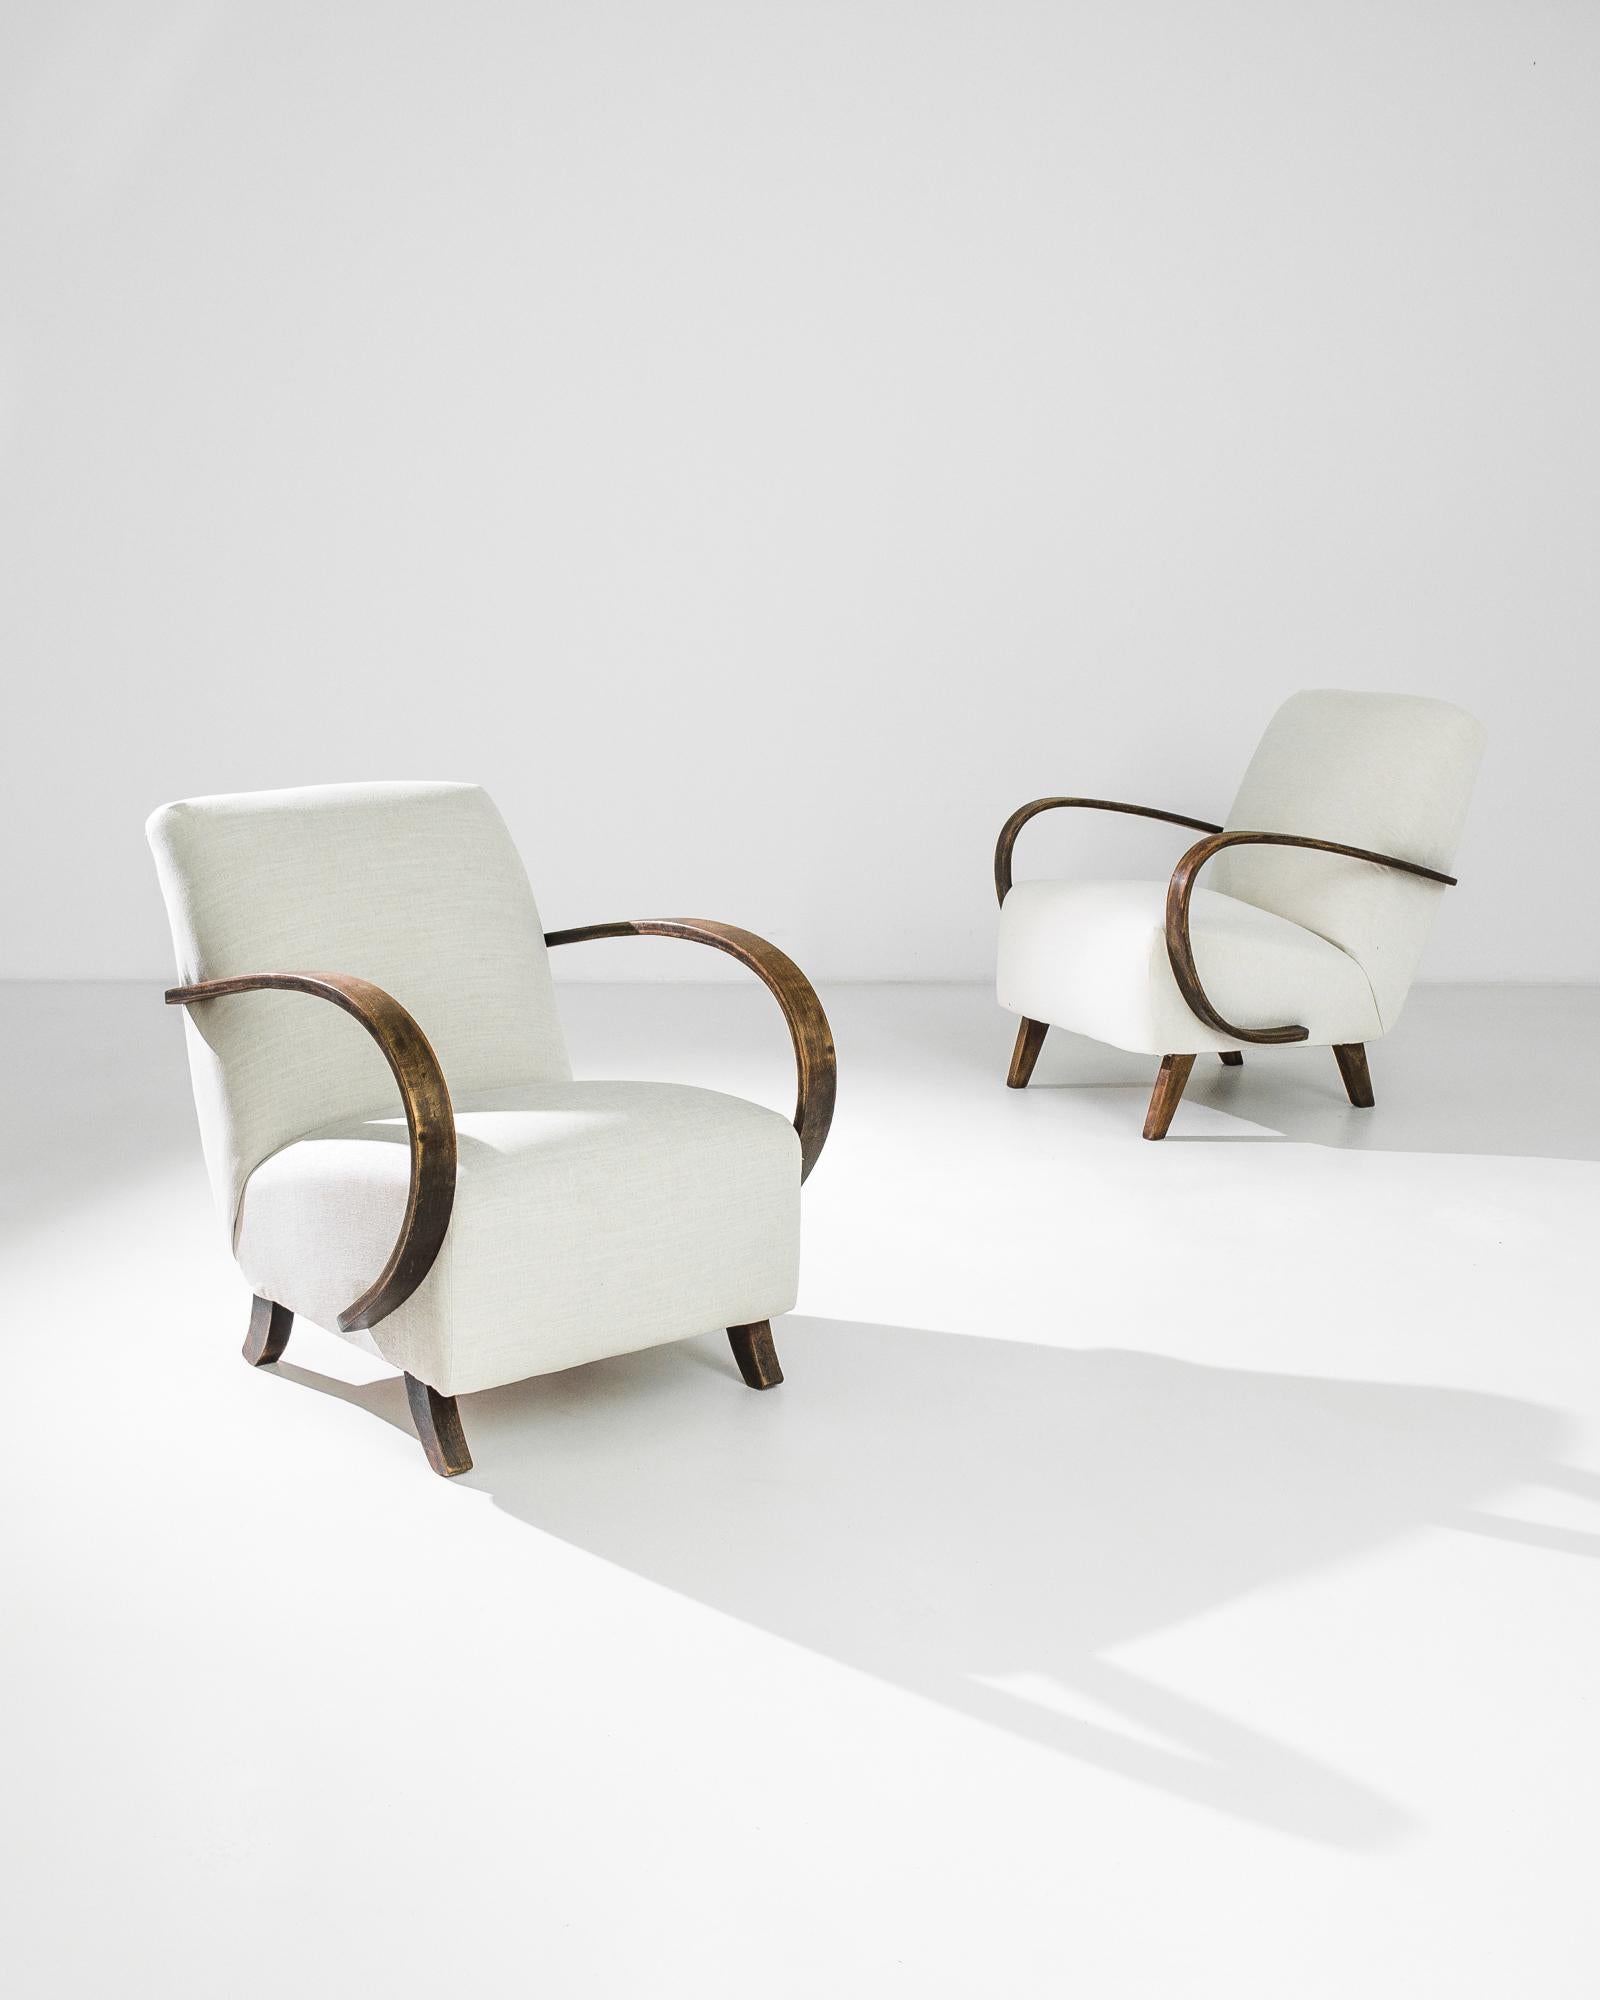 A pair of armchairs by Czech furniture designer J. Halabala. Made in the 1950s, the eye-catching Silhouette and comfortable design has an enduring appeal. A deep upholstered seat upon curved wooden feet is framed by the dramatic curves of the